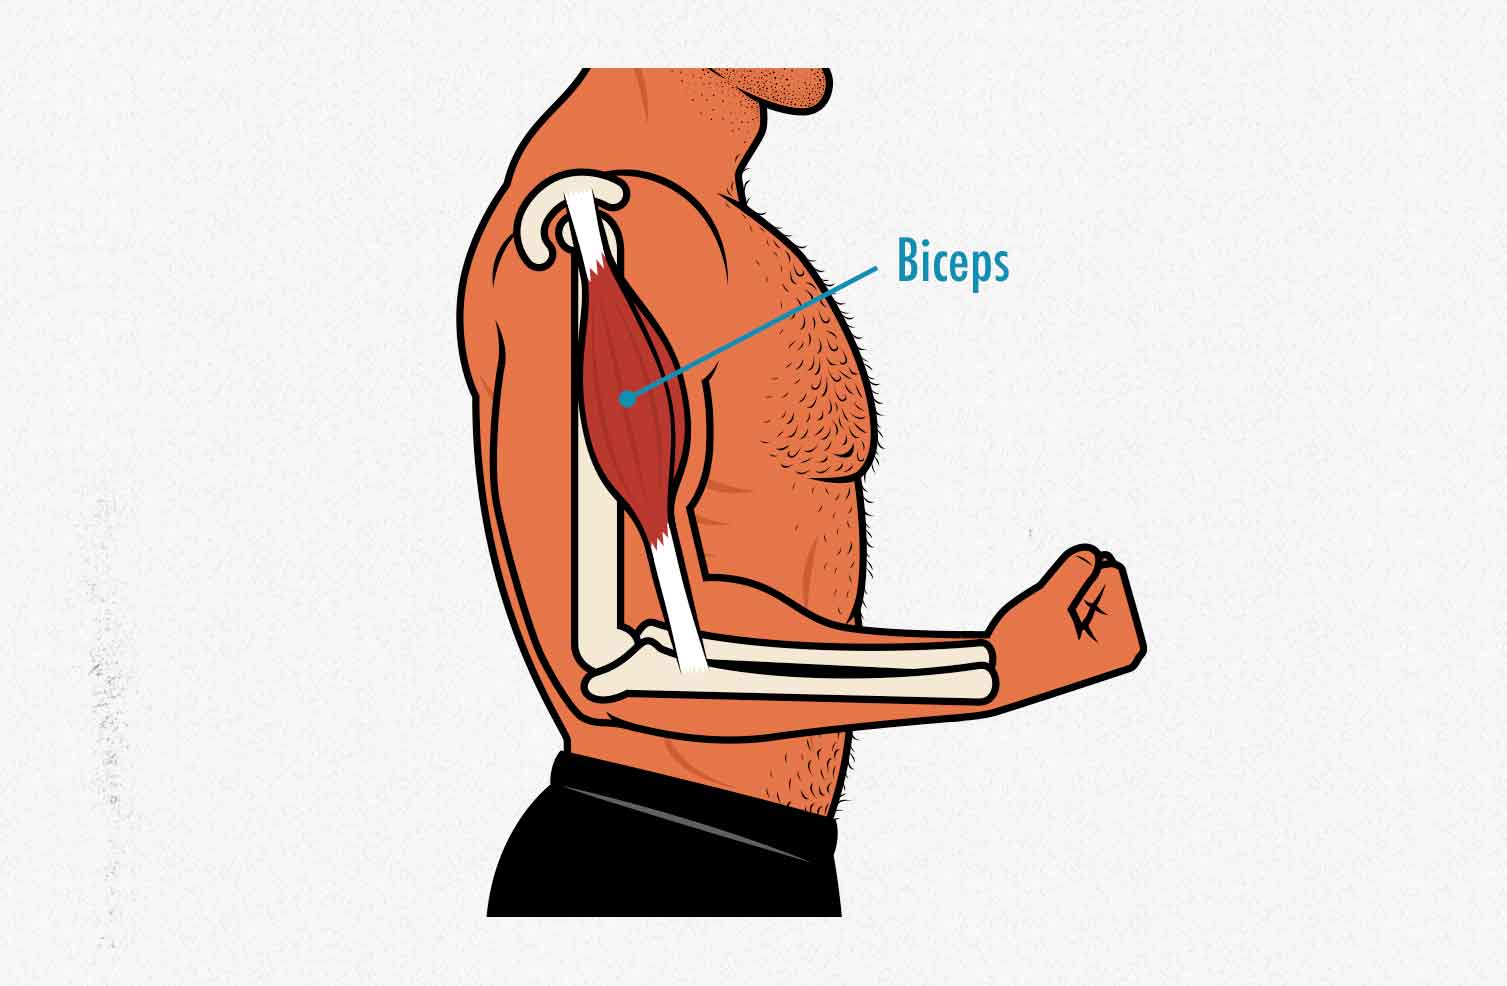 Illustration showing the anatomy of the biceps muscle for bodybuilders.